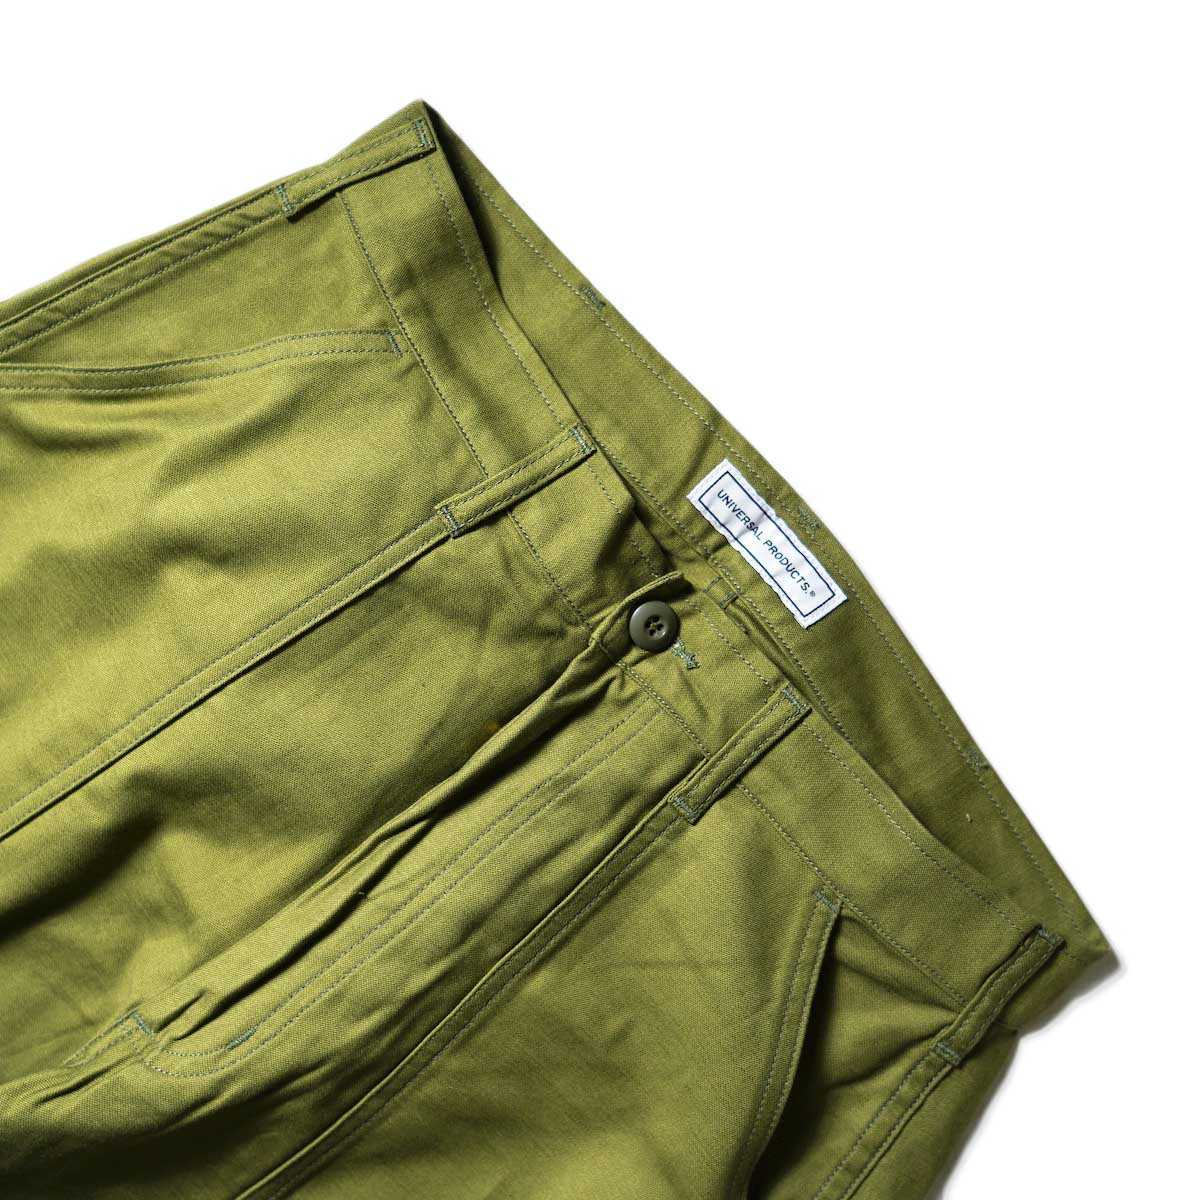 UNIVERSAL PRODUCTS / Gung Ho 1tuck Baker Pants (Olive)ウエスト